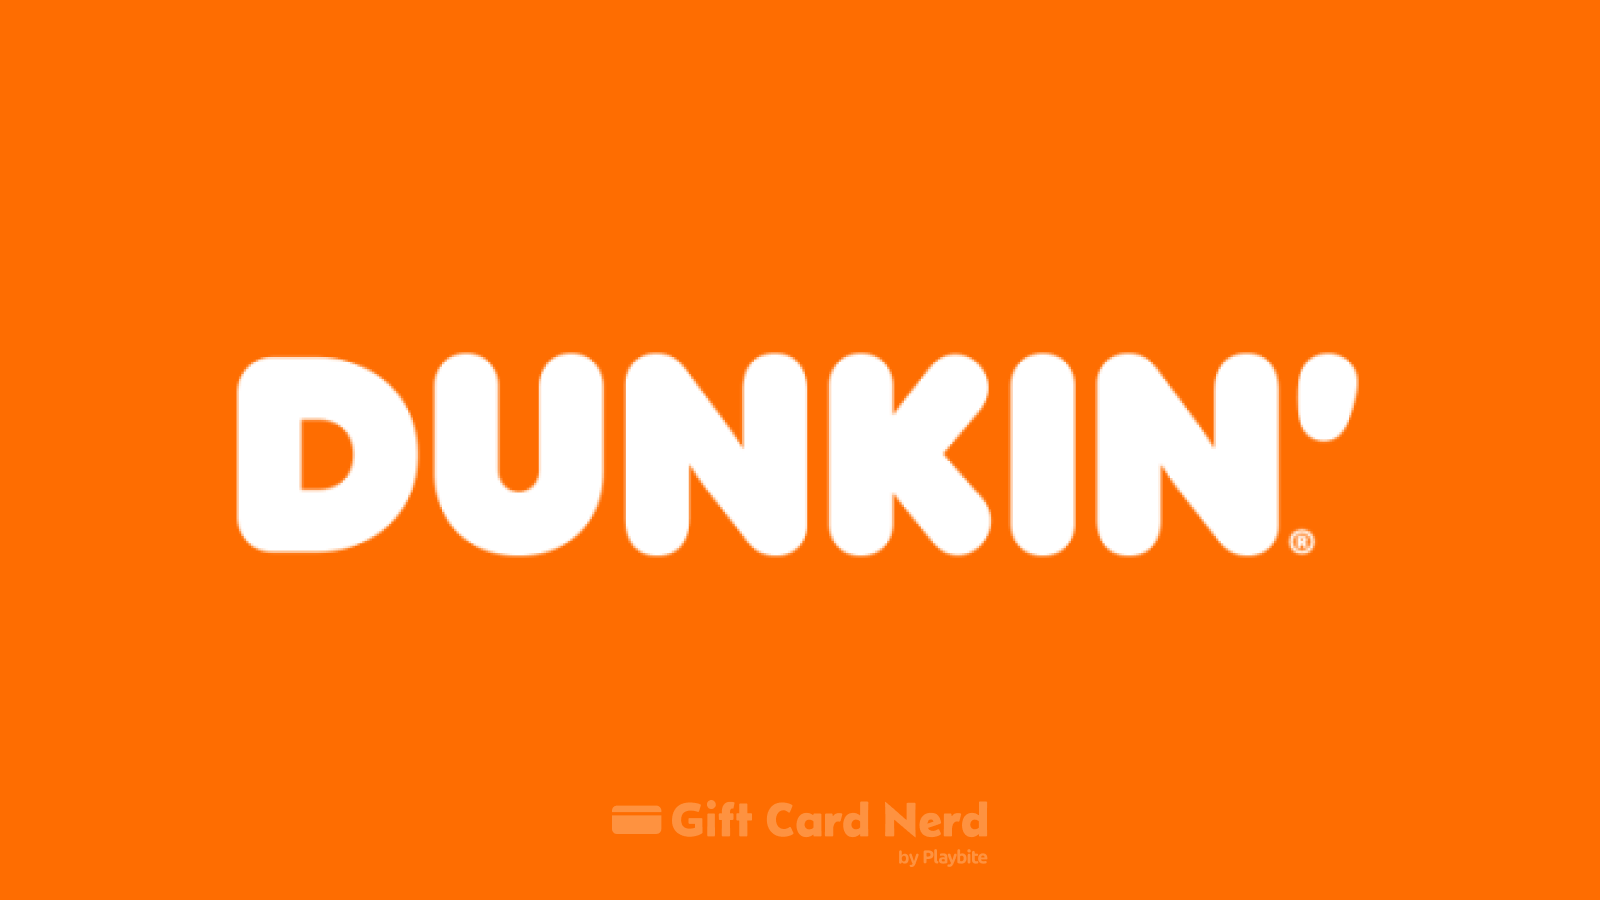 Can I Use a Dunkin Gift Card on Google Play Store?